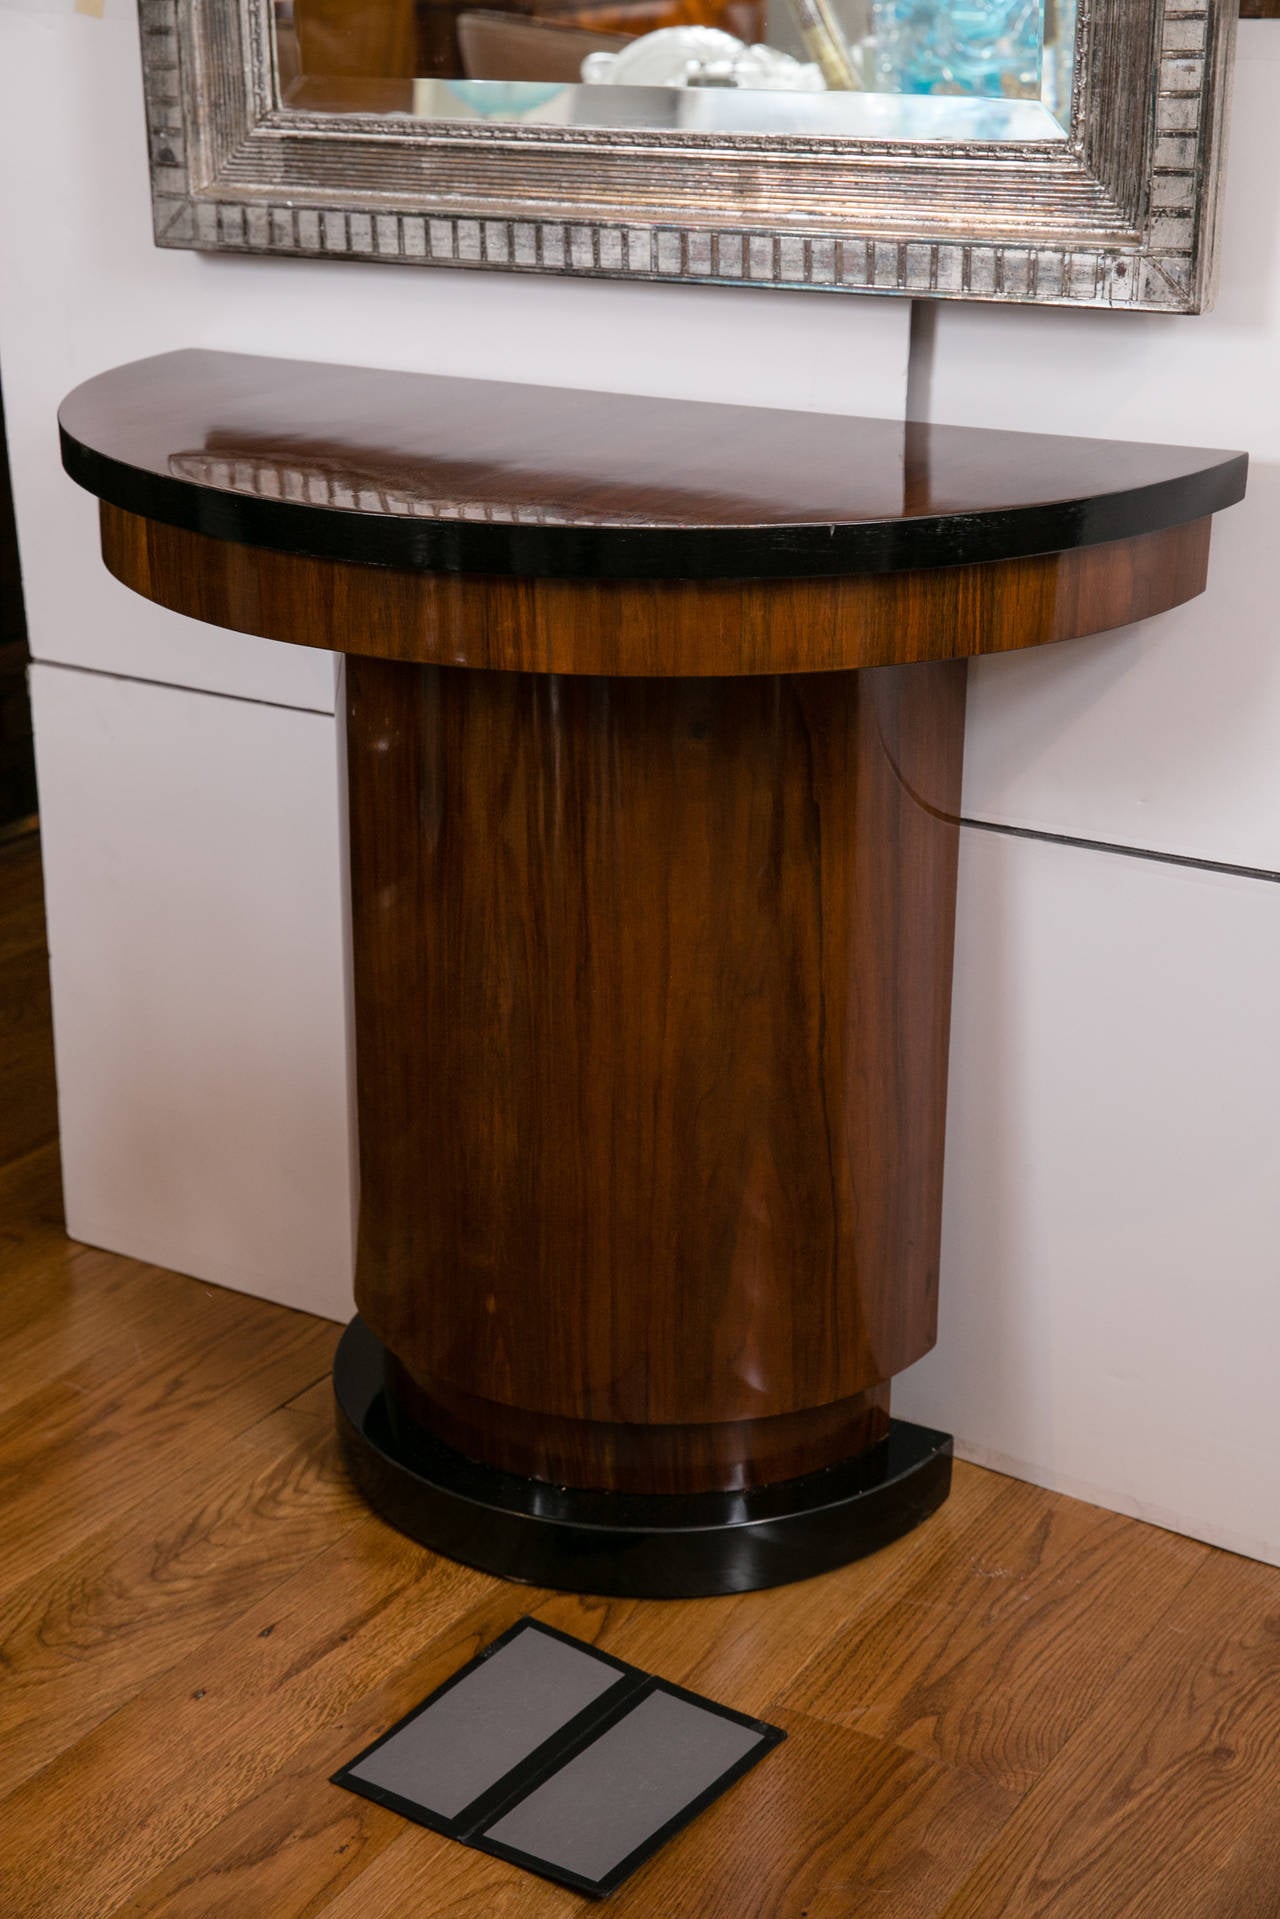 Sleek pair of demilune console tables in walnut with black lacquered detailing.